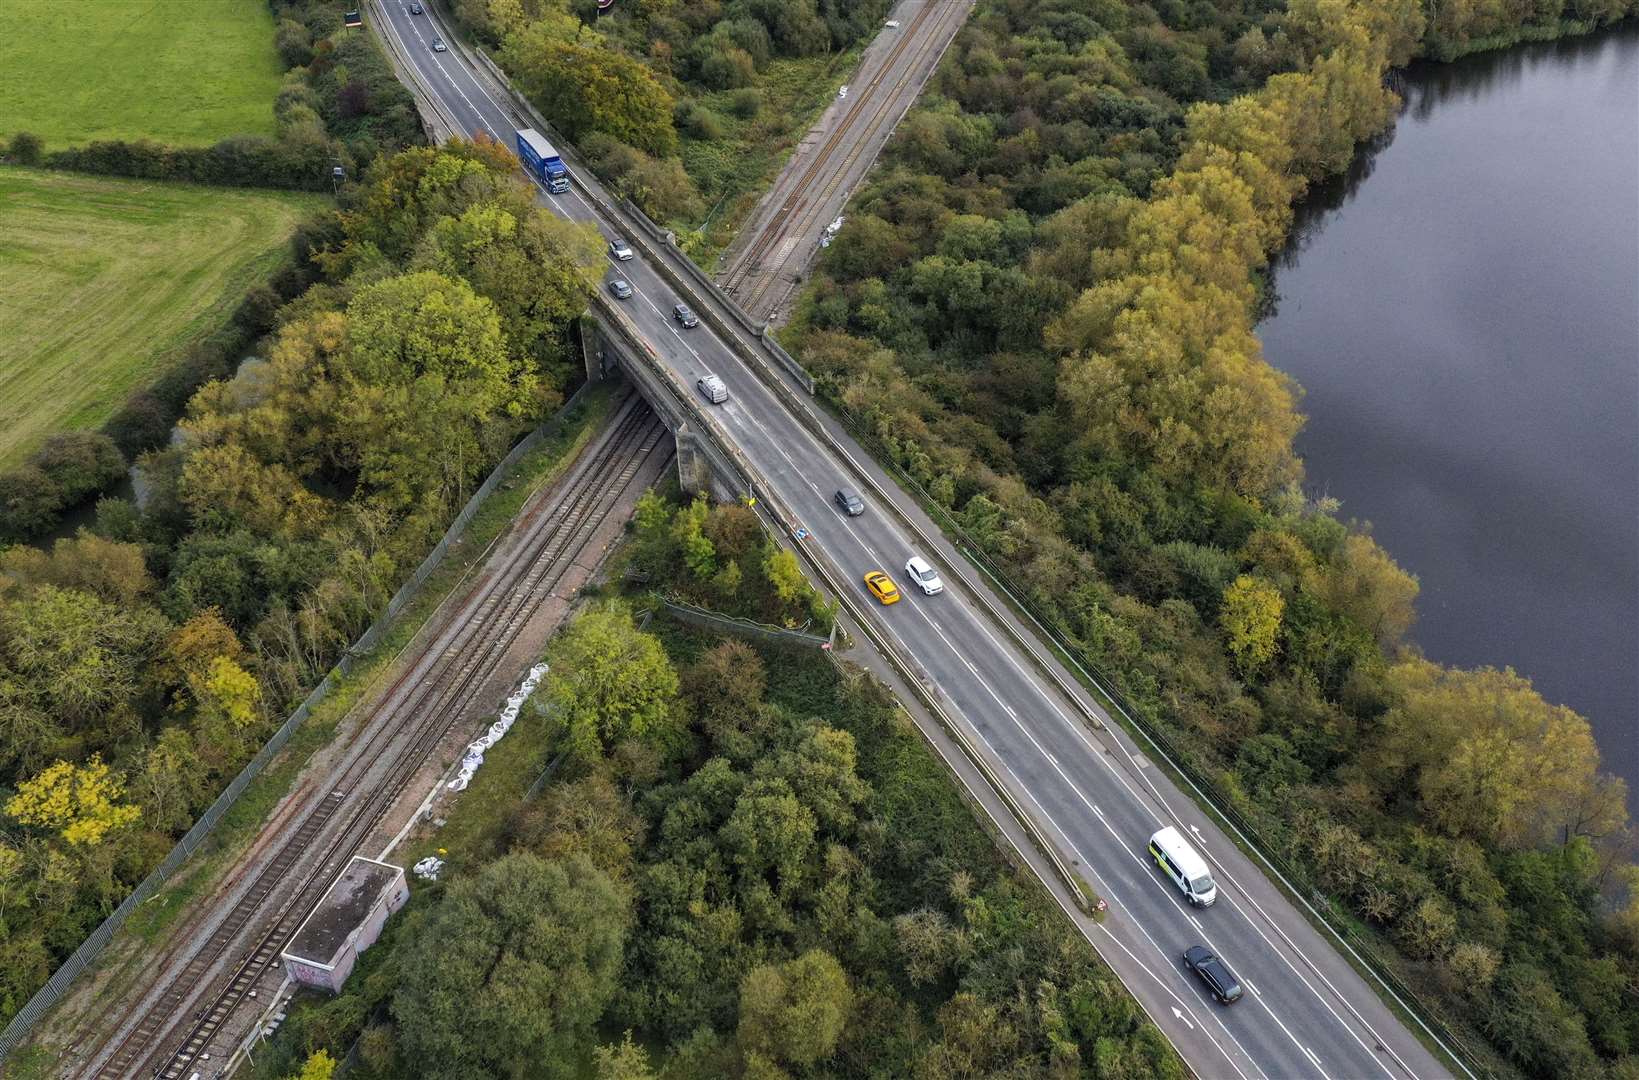 The A40 near Oxford where the crash happened on Monday evening (Steve Parsons/PA)